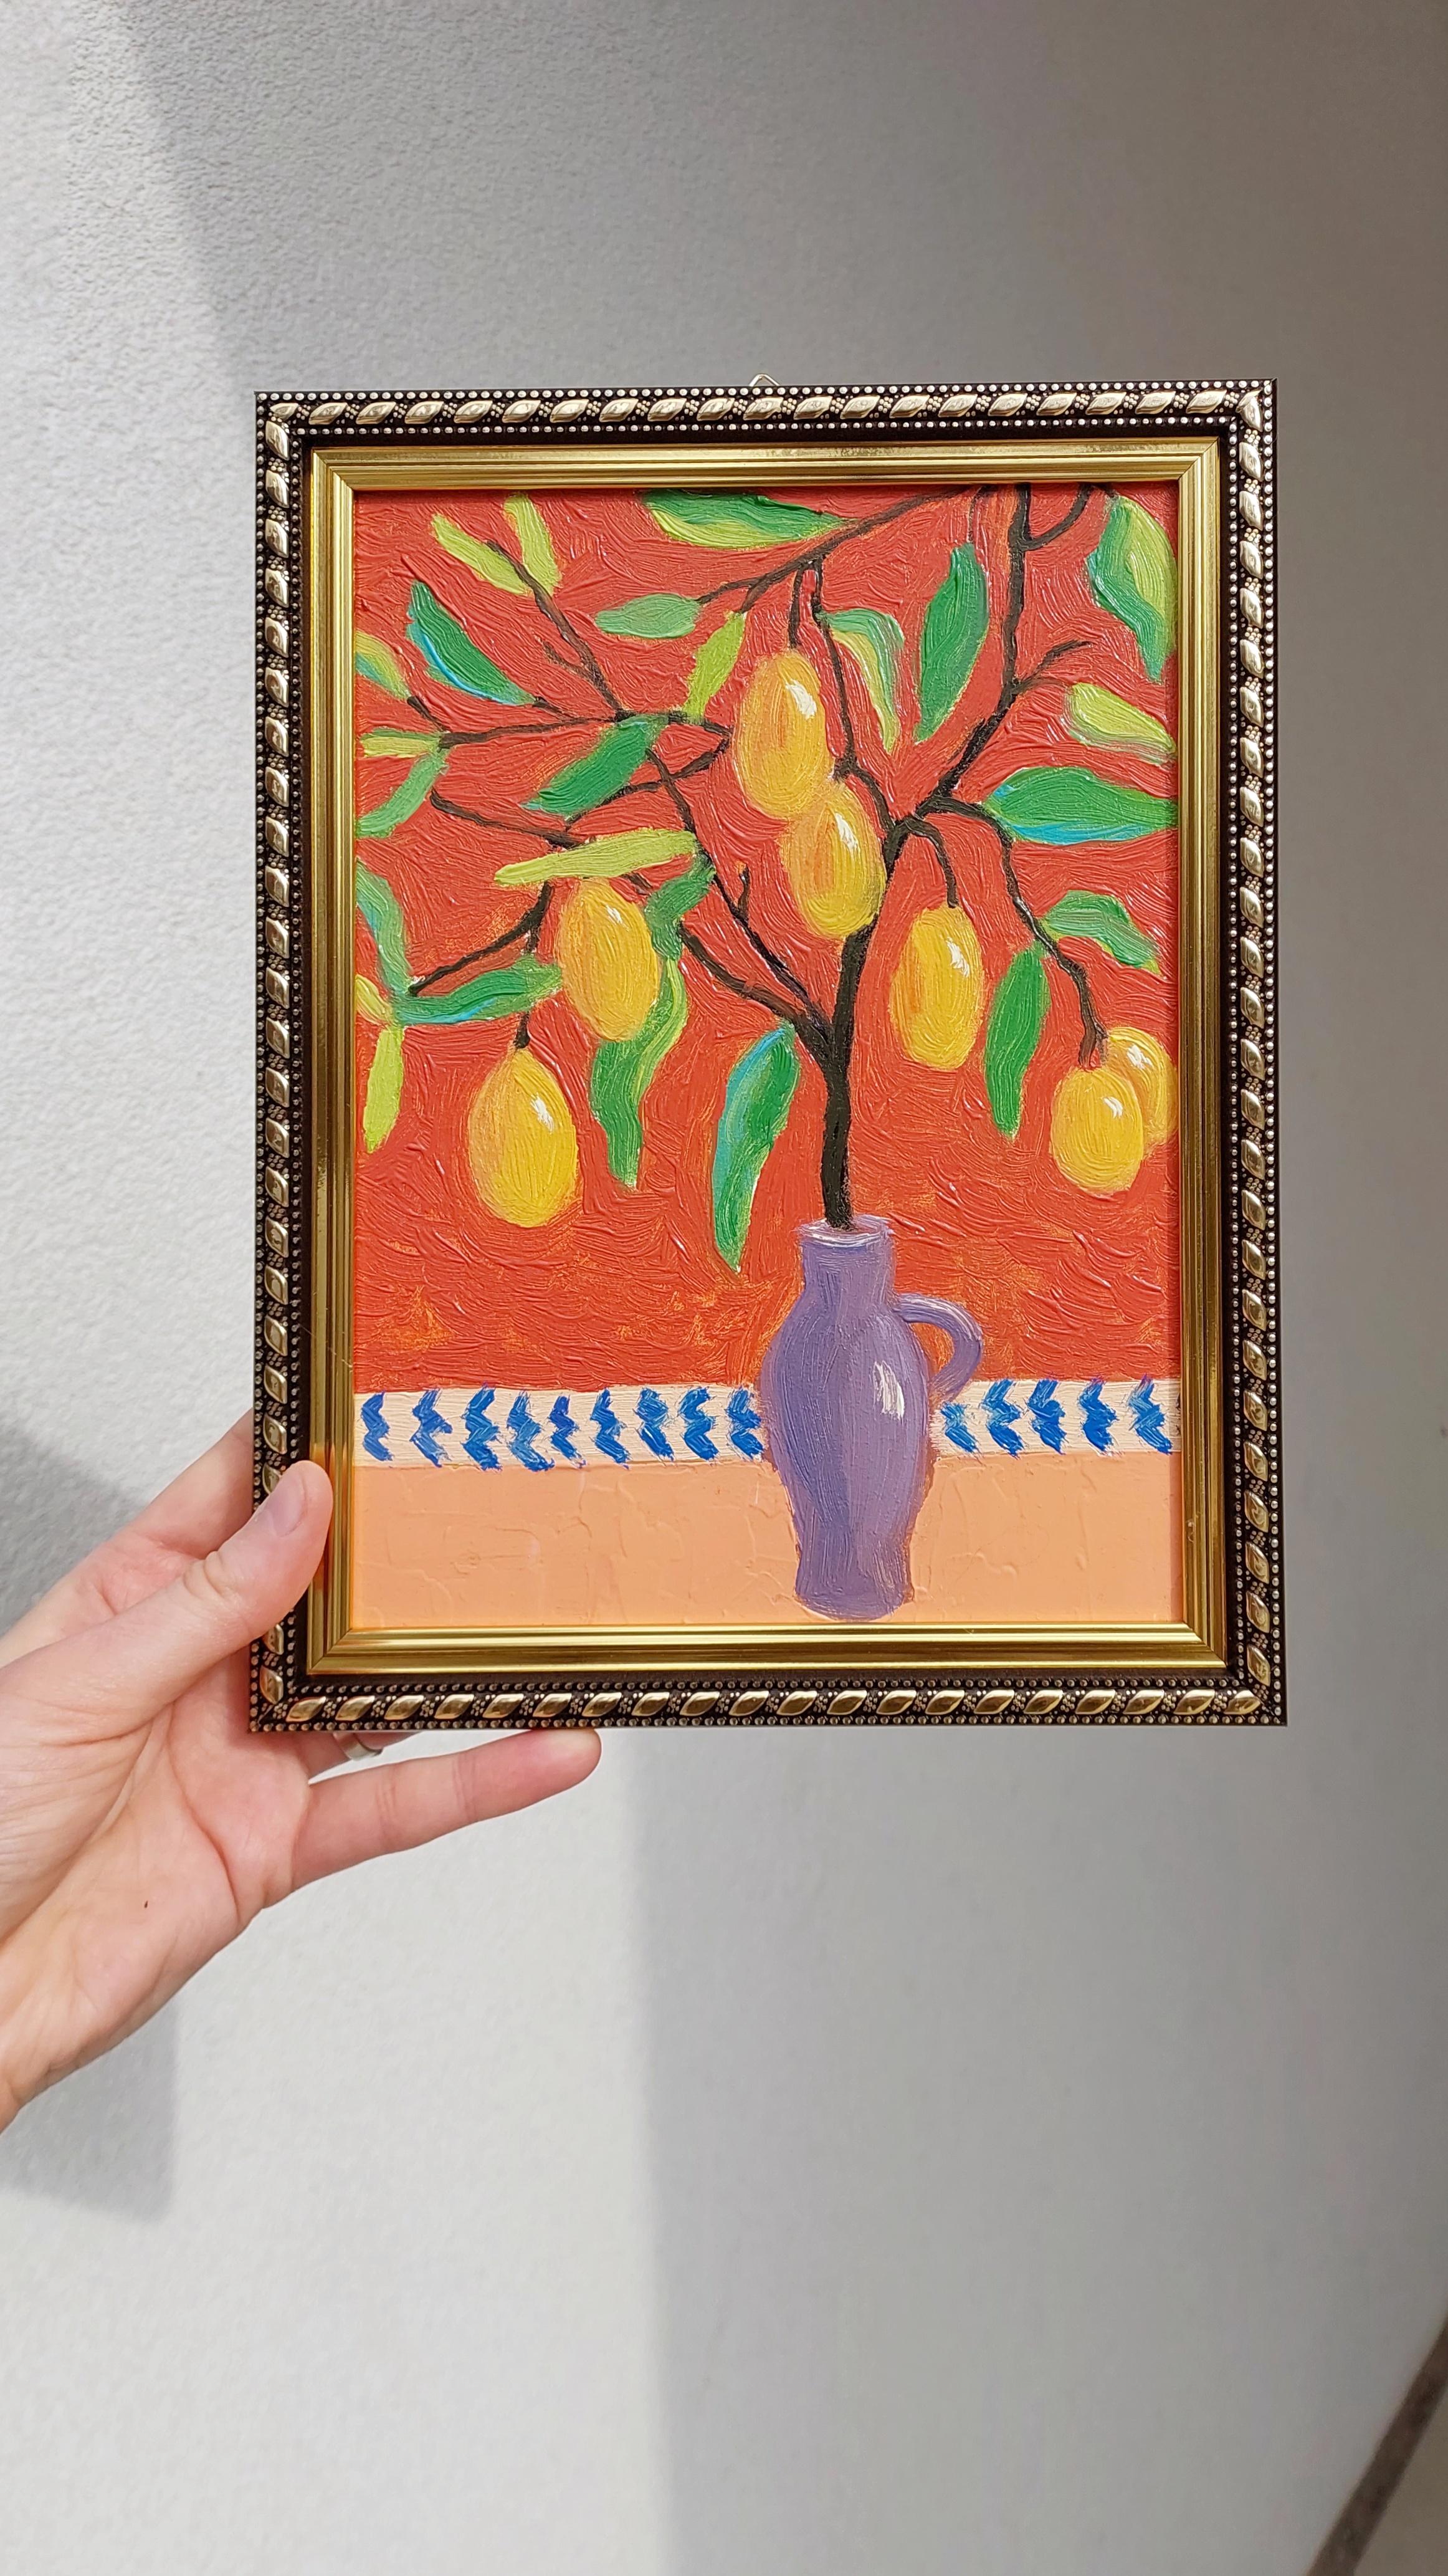 Sweet and Sour Original Oil Painting Lemon Tree by Ksenia Tsyganyuk For Sale 5